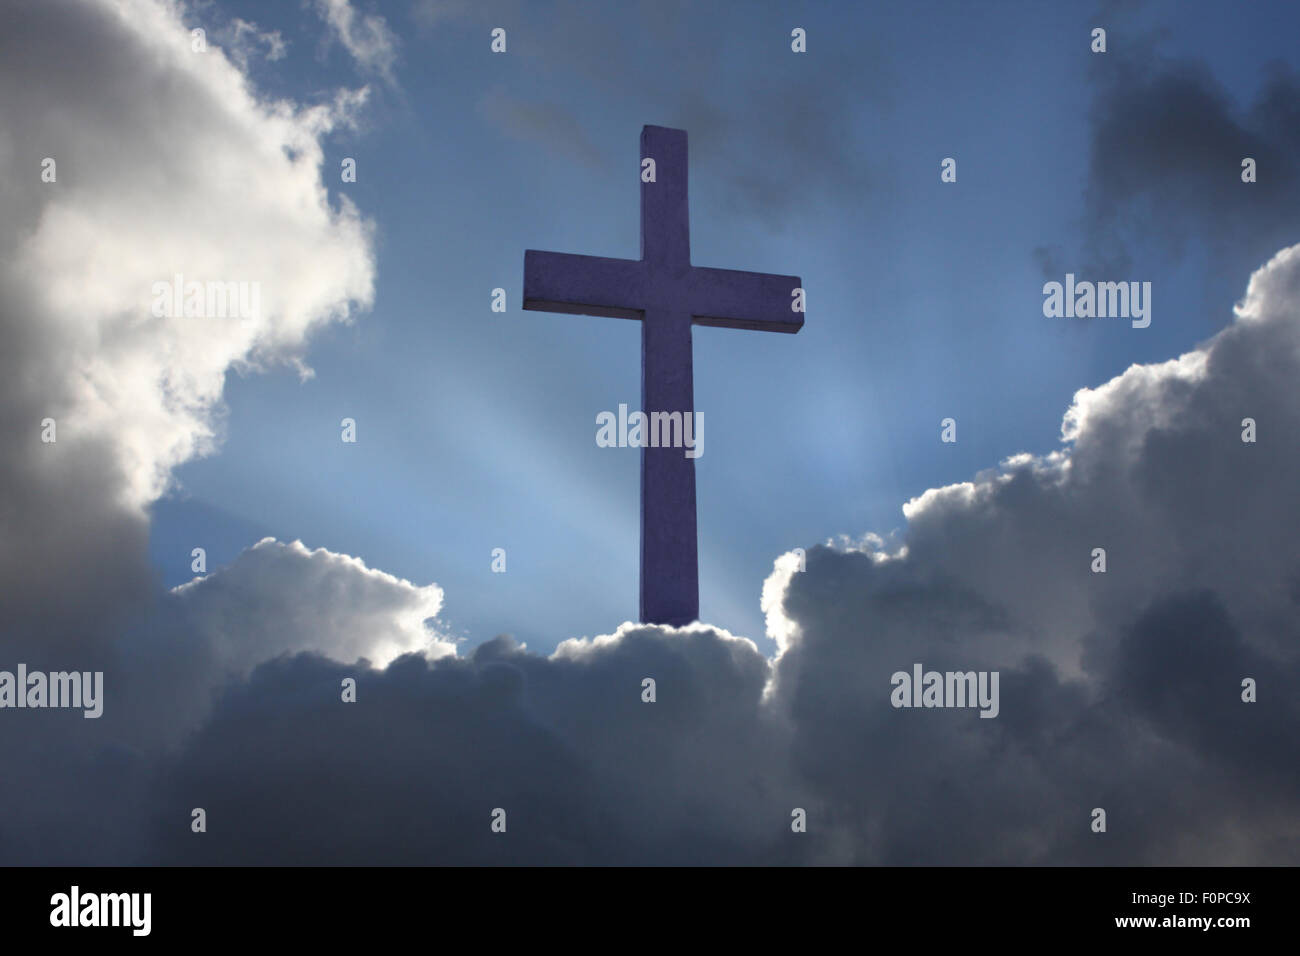 Christian cross coming out of clouds Stock Photo